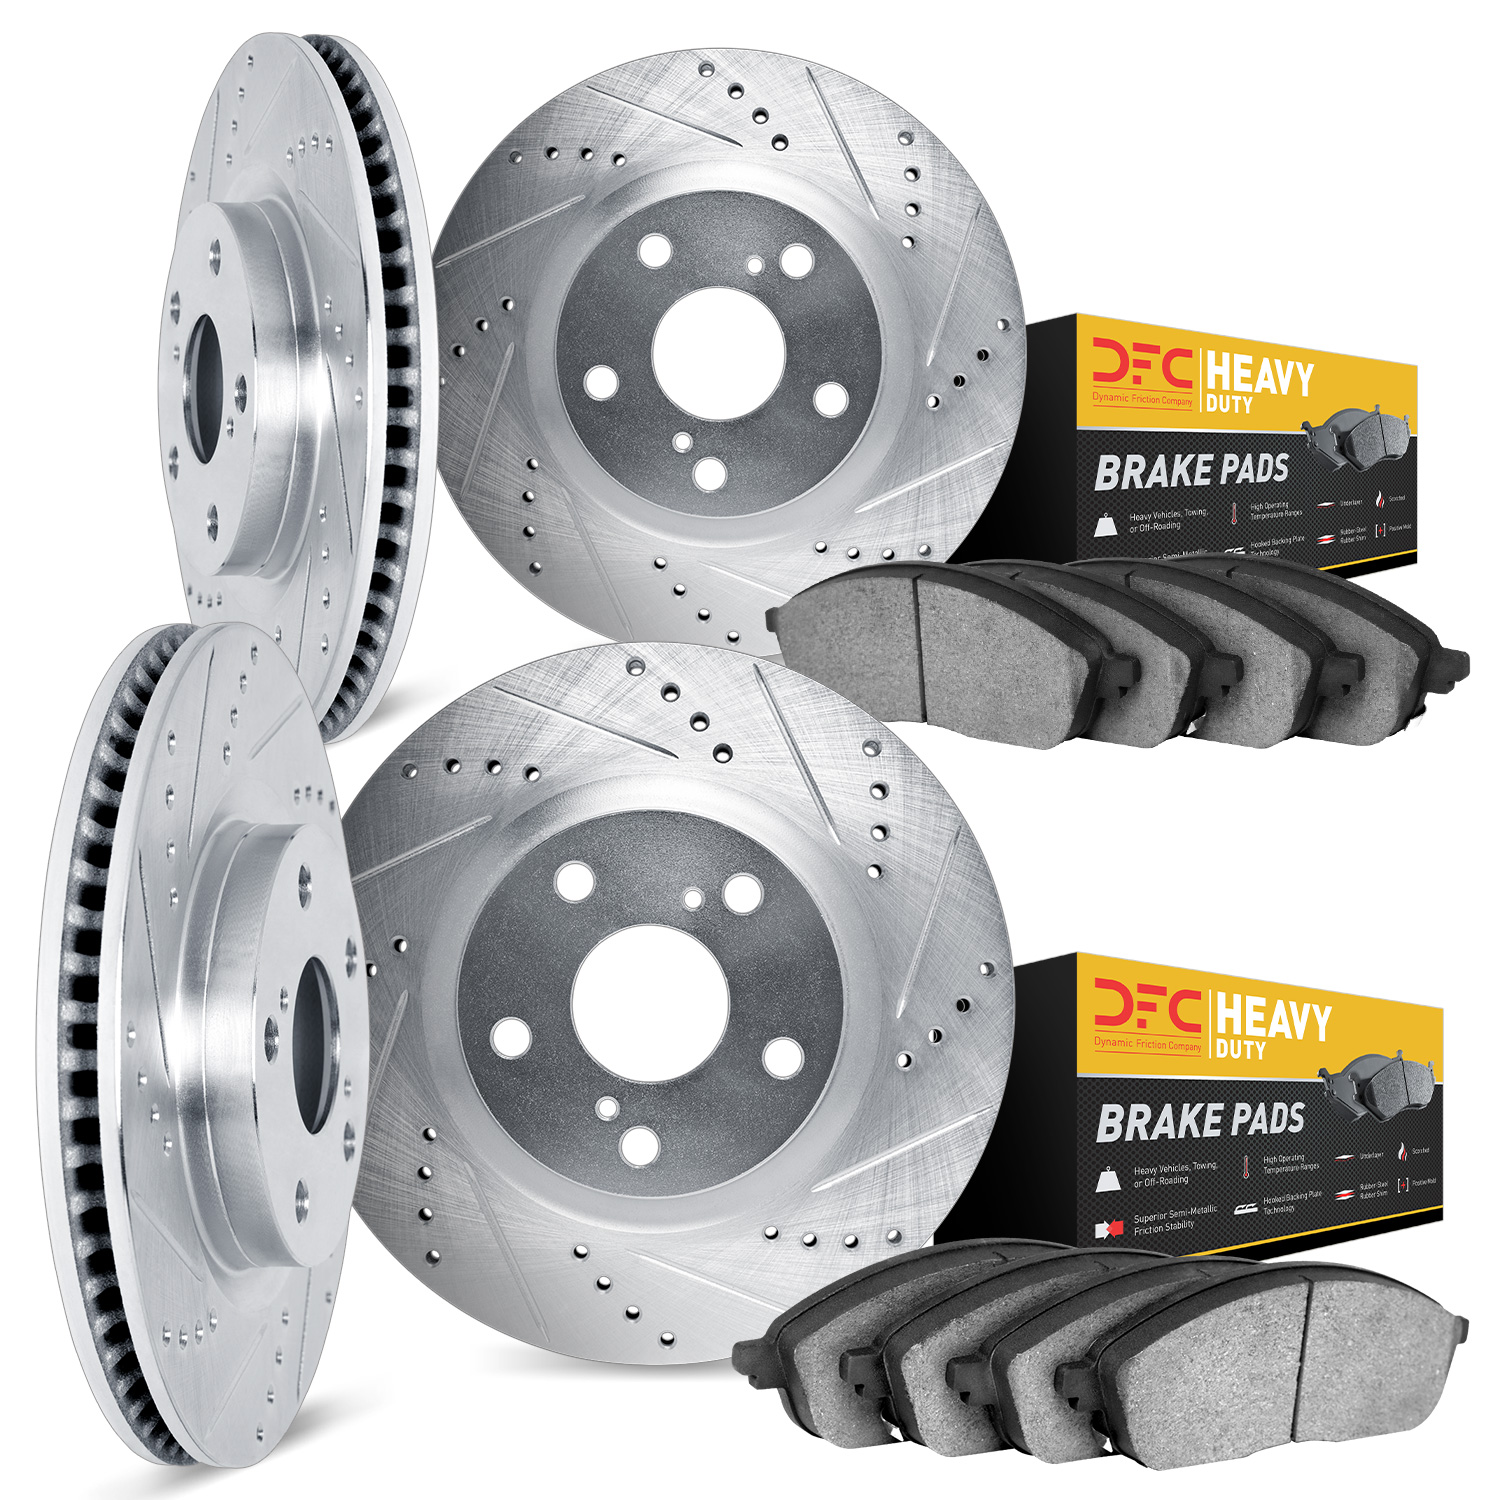 7204-42011 Drilled/Slotted Rotors w/Heavy-Duty Brake Pads Kit [Silver], Fits Select Mopar, Position: Front and Rear